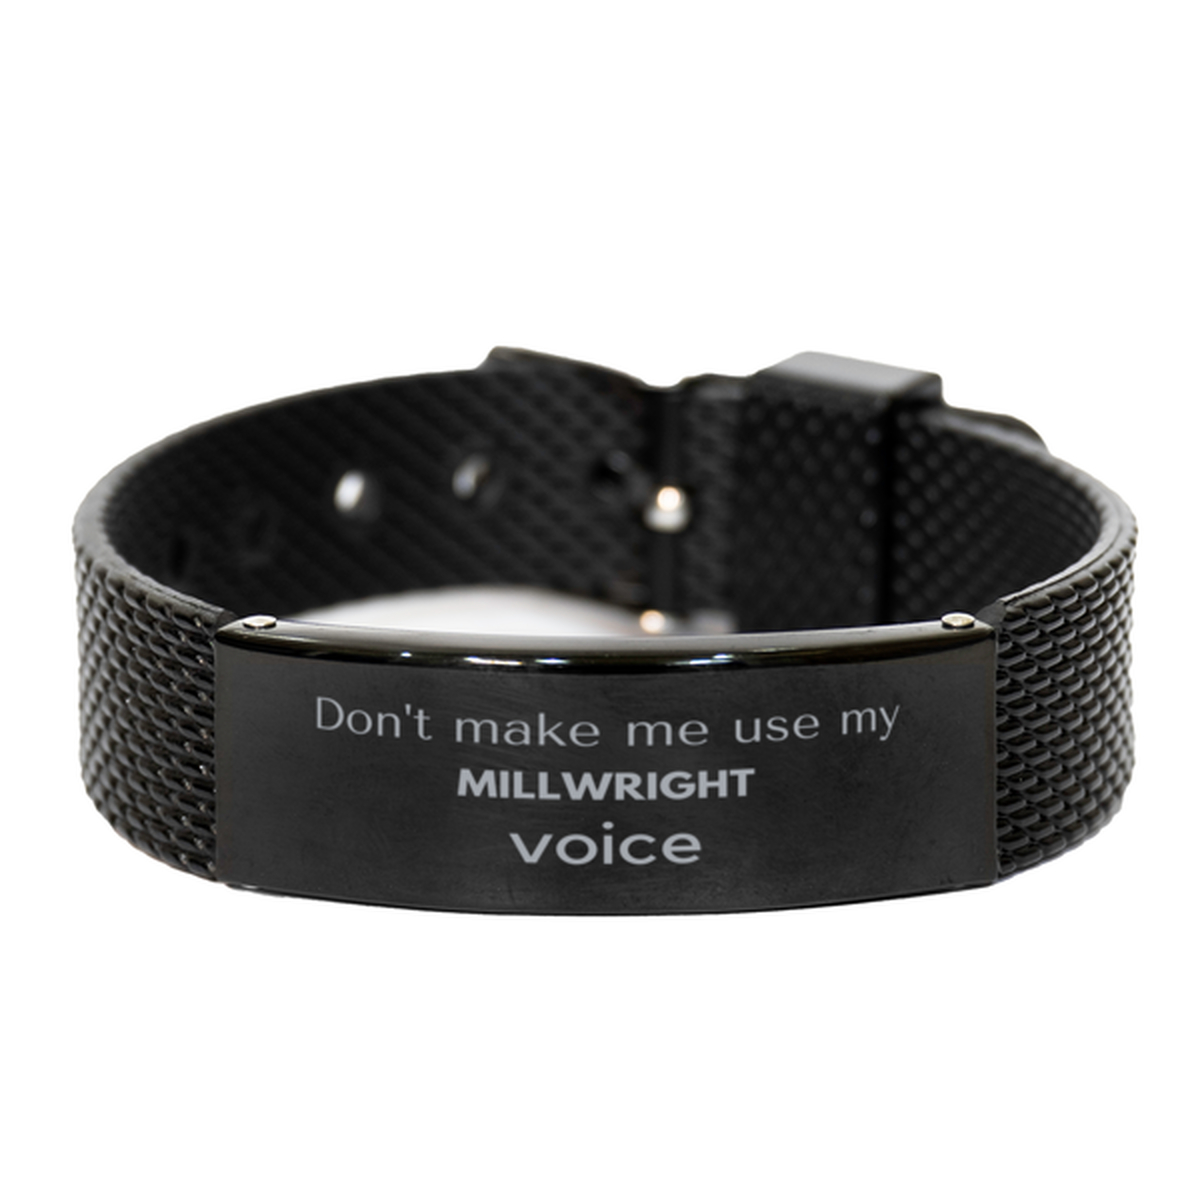 Don't make me use my Millwright voice, Sarcasm Millwright Gifts, Christmas Millwright Black Shark Mesh Bracelet Birthday Unique Gifts For Millwright Coworkers, Men, Women, Colleague, Friends